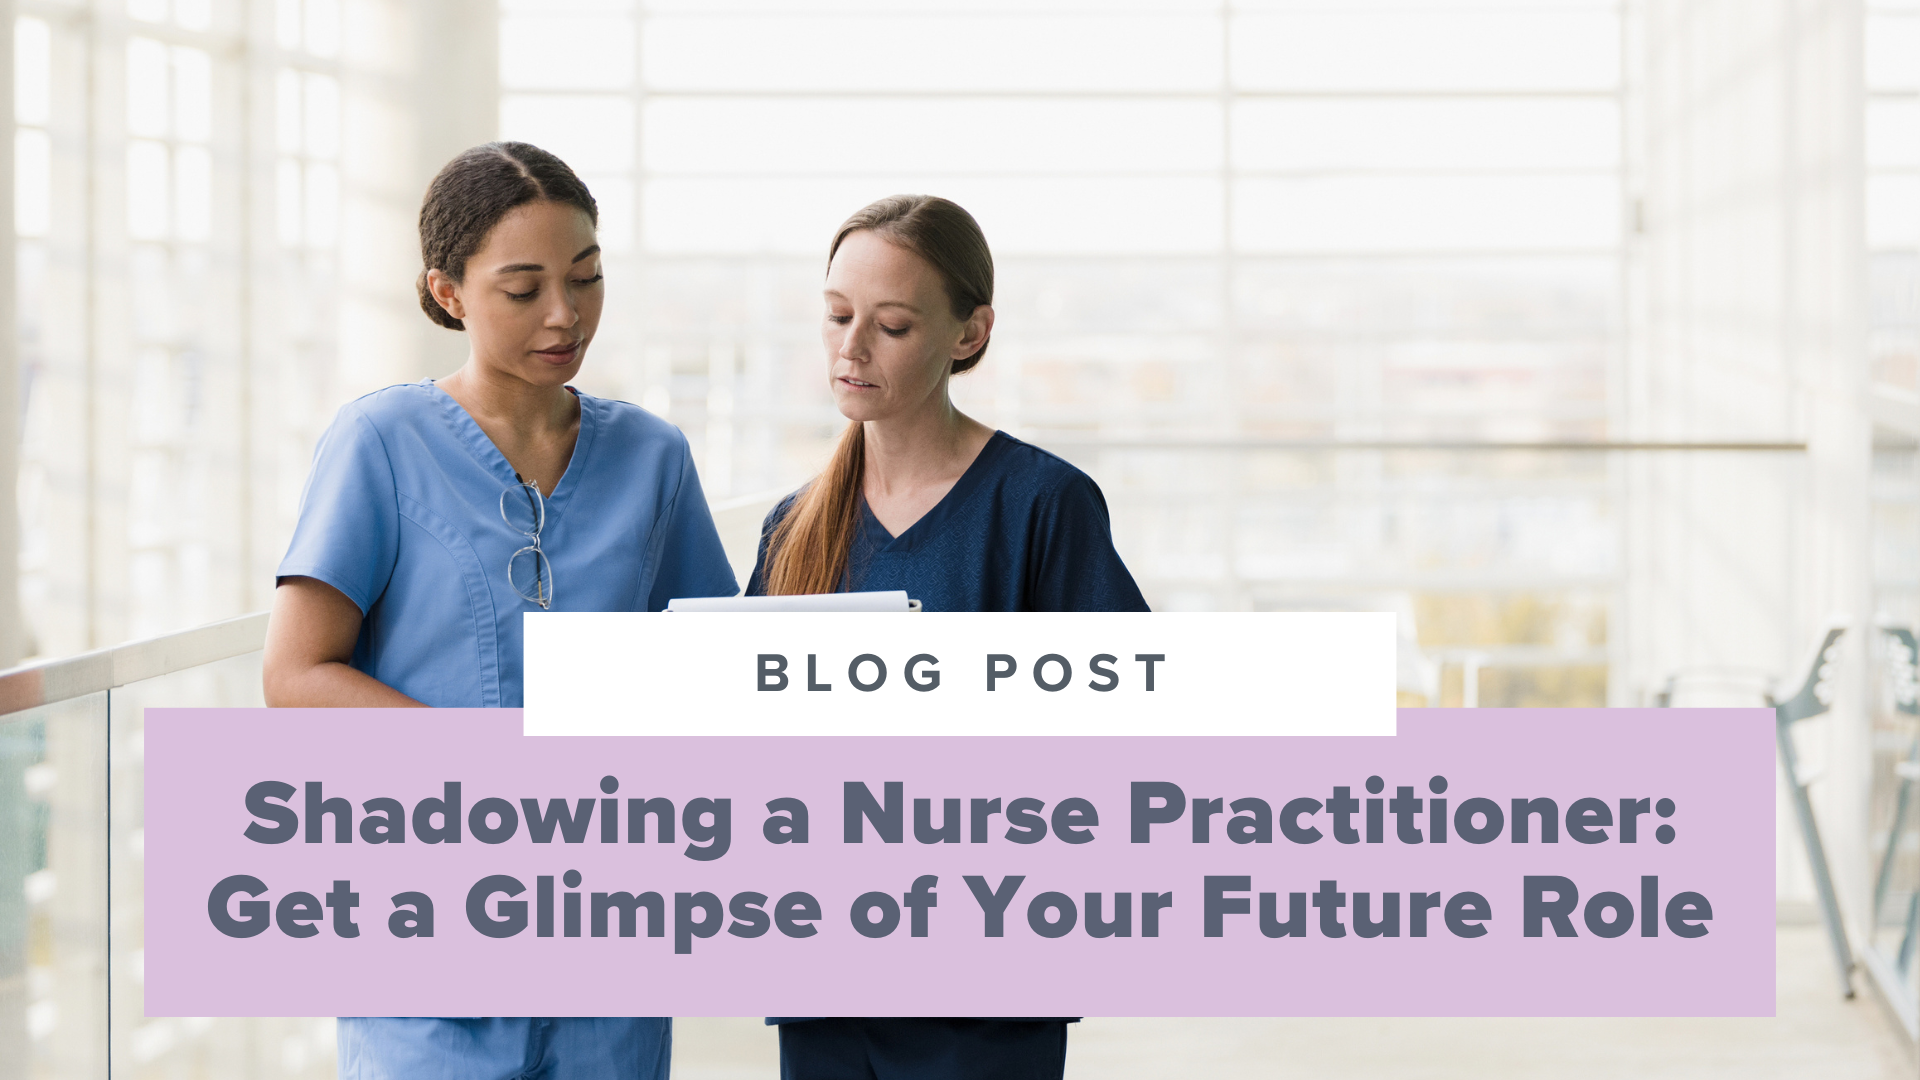 SMNP Blog - Shadowing a Nurse Practitioner: Get a Glimpse of Your Future Role